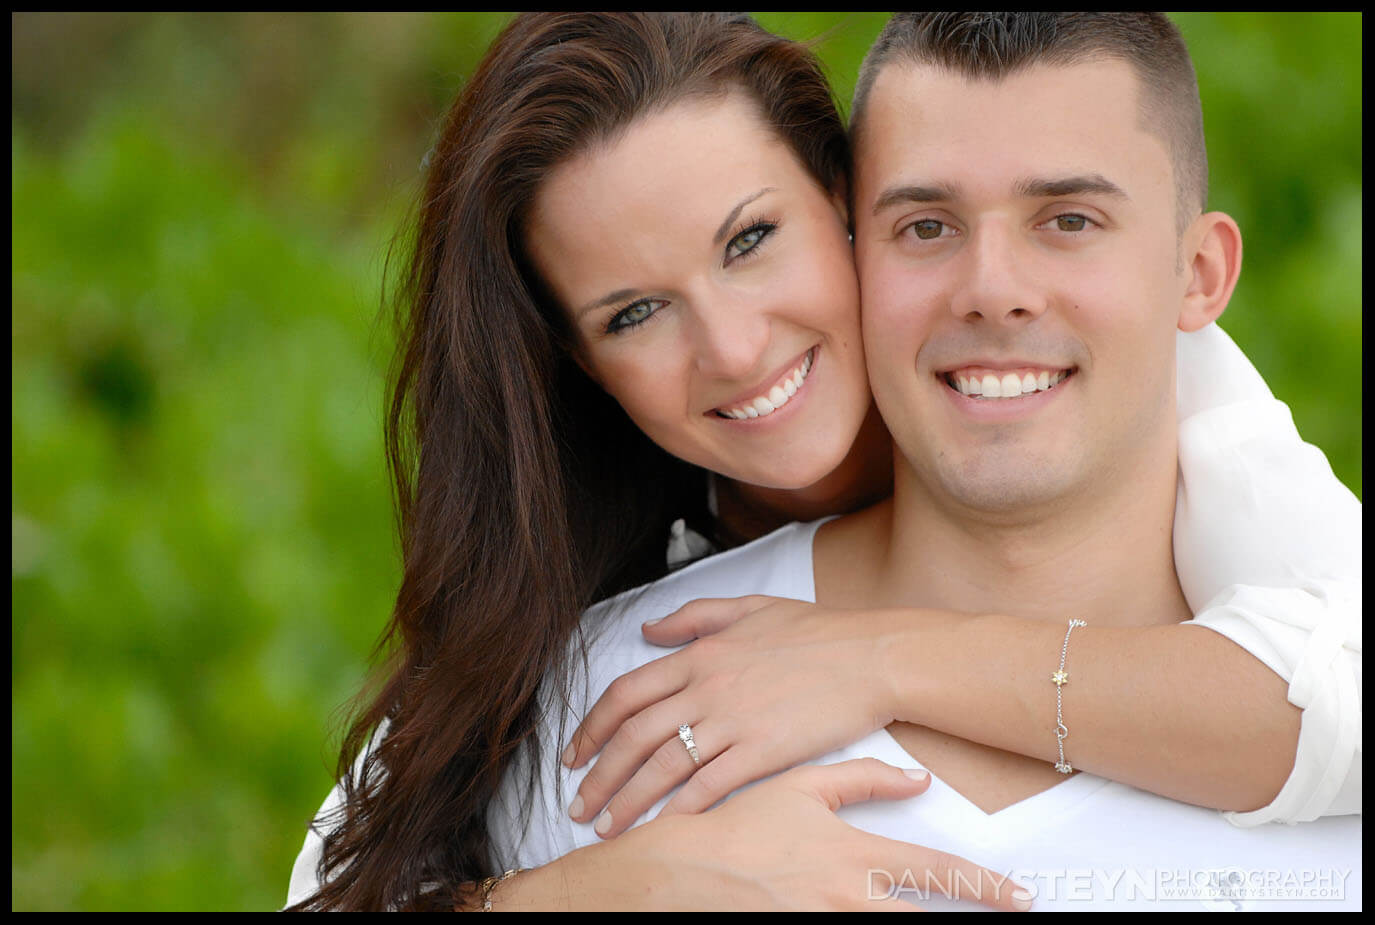 engagement photography fort lauderdale